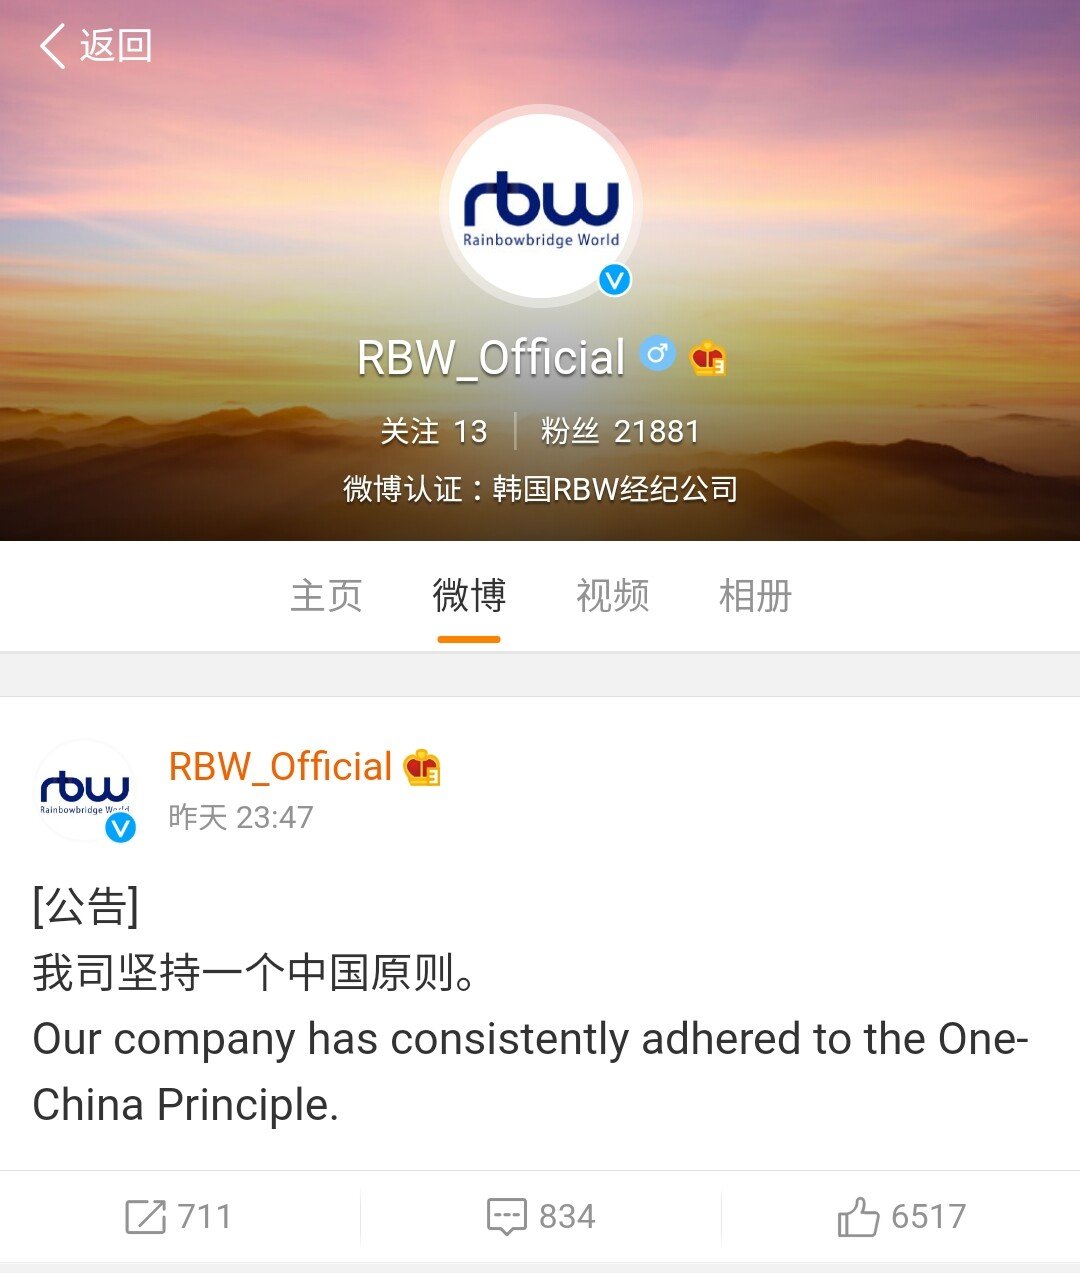 One of Mamamoo's agency declared its support for China.